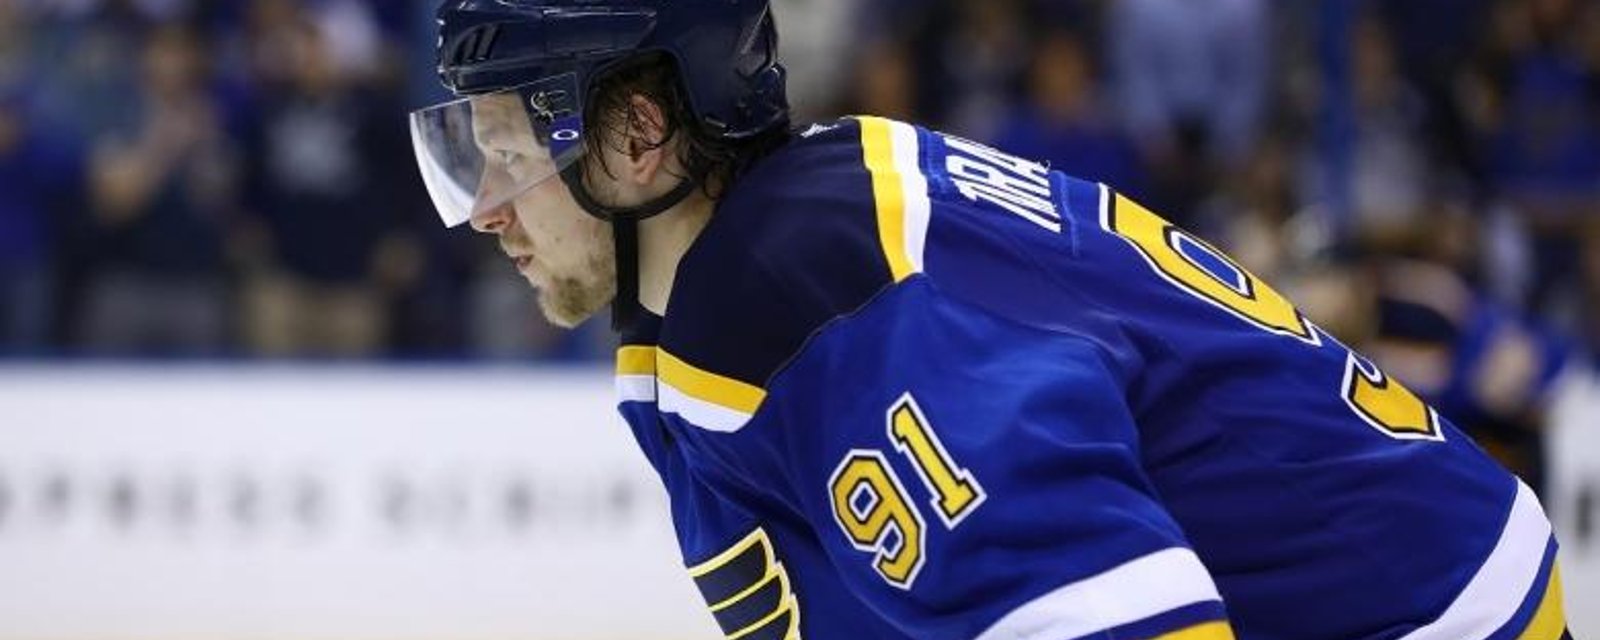 Tarasenko gets called out by his coach amidst rumors of unhappyness between two sides.